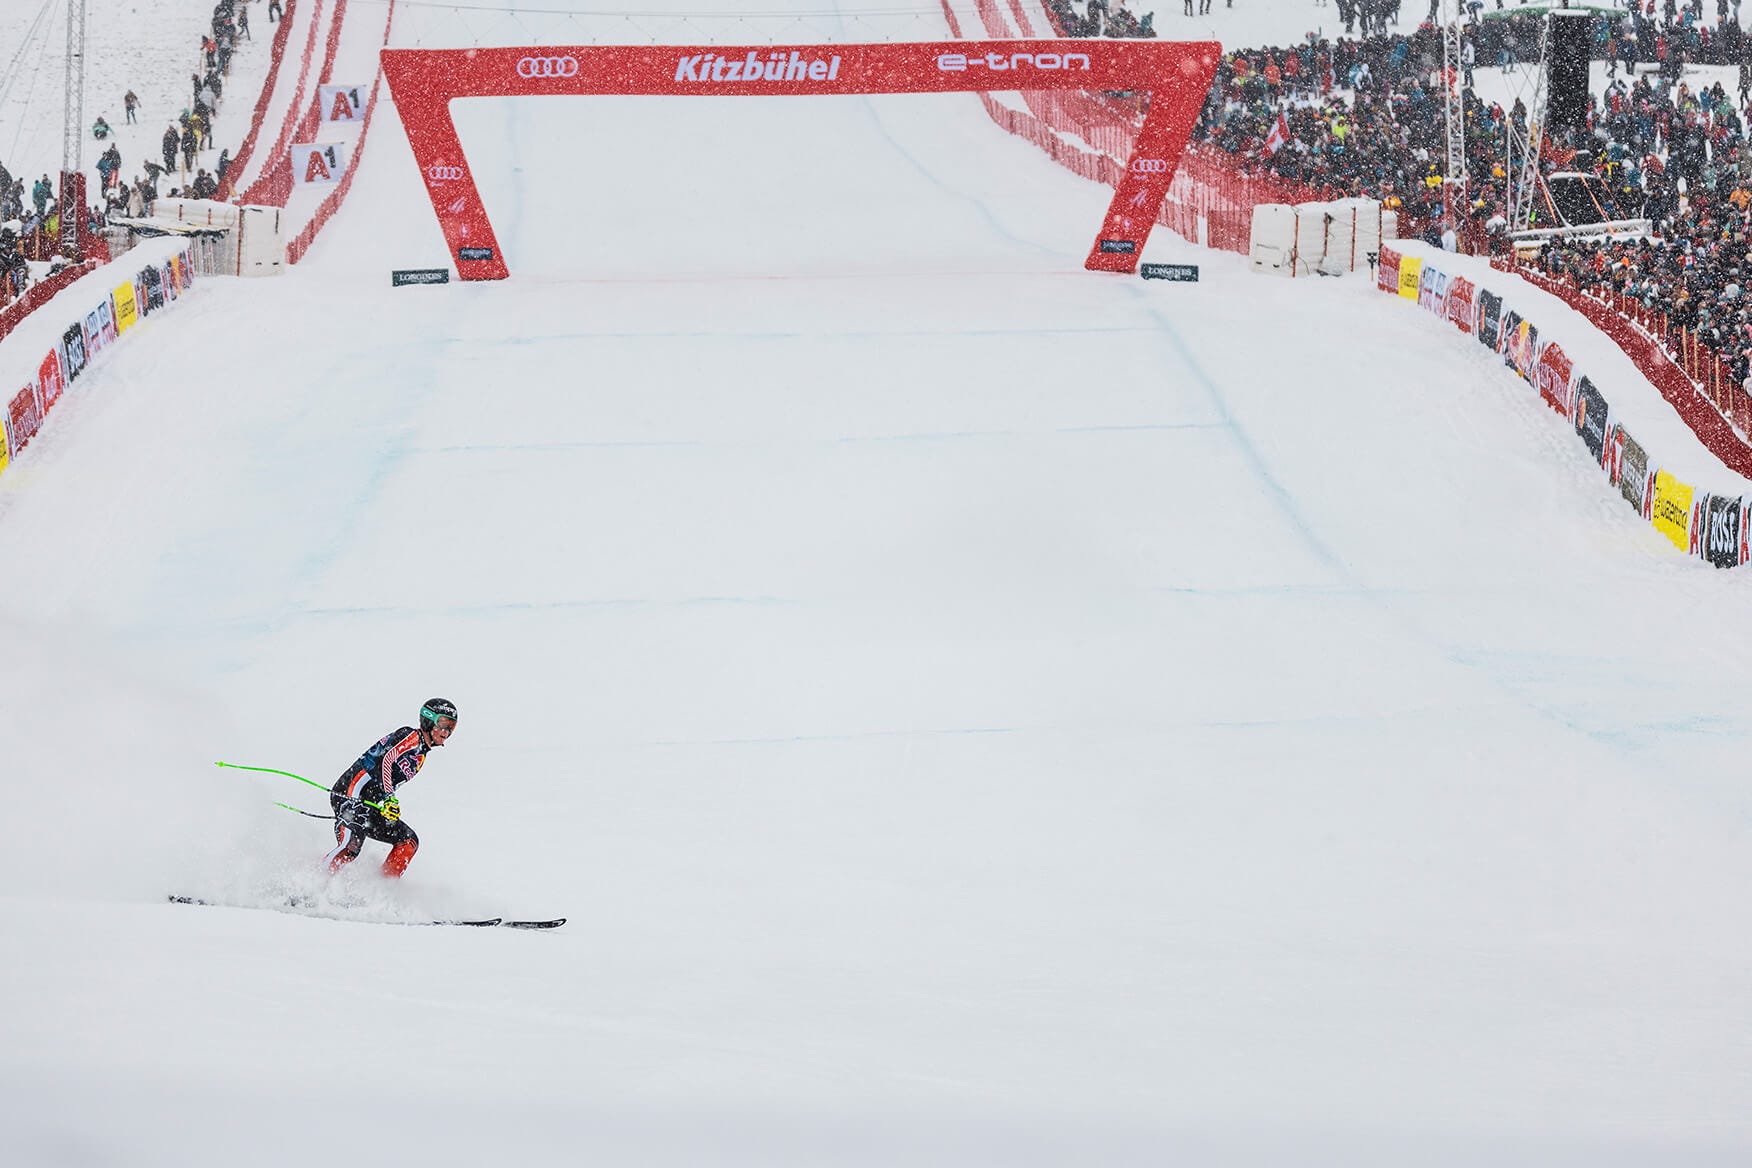 Downhill skier in the finish area of The Streif at Kitzbühel